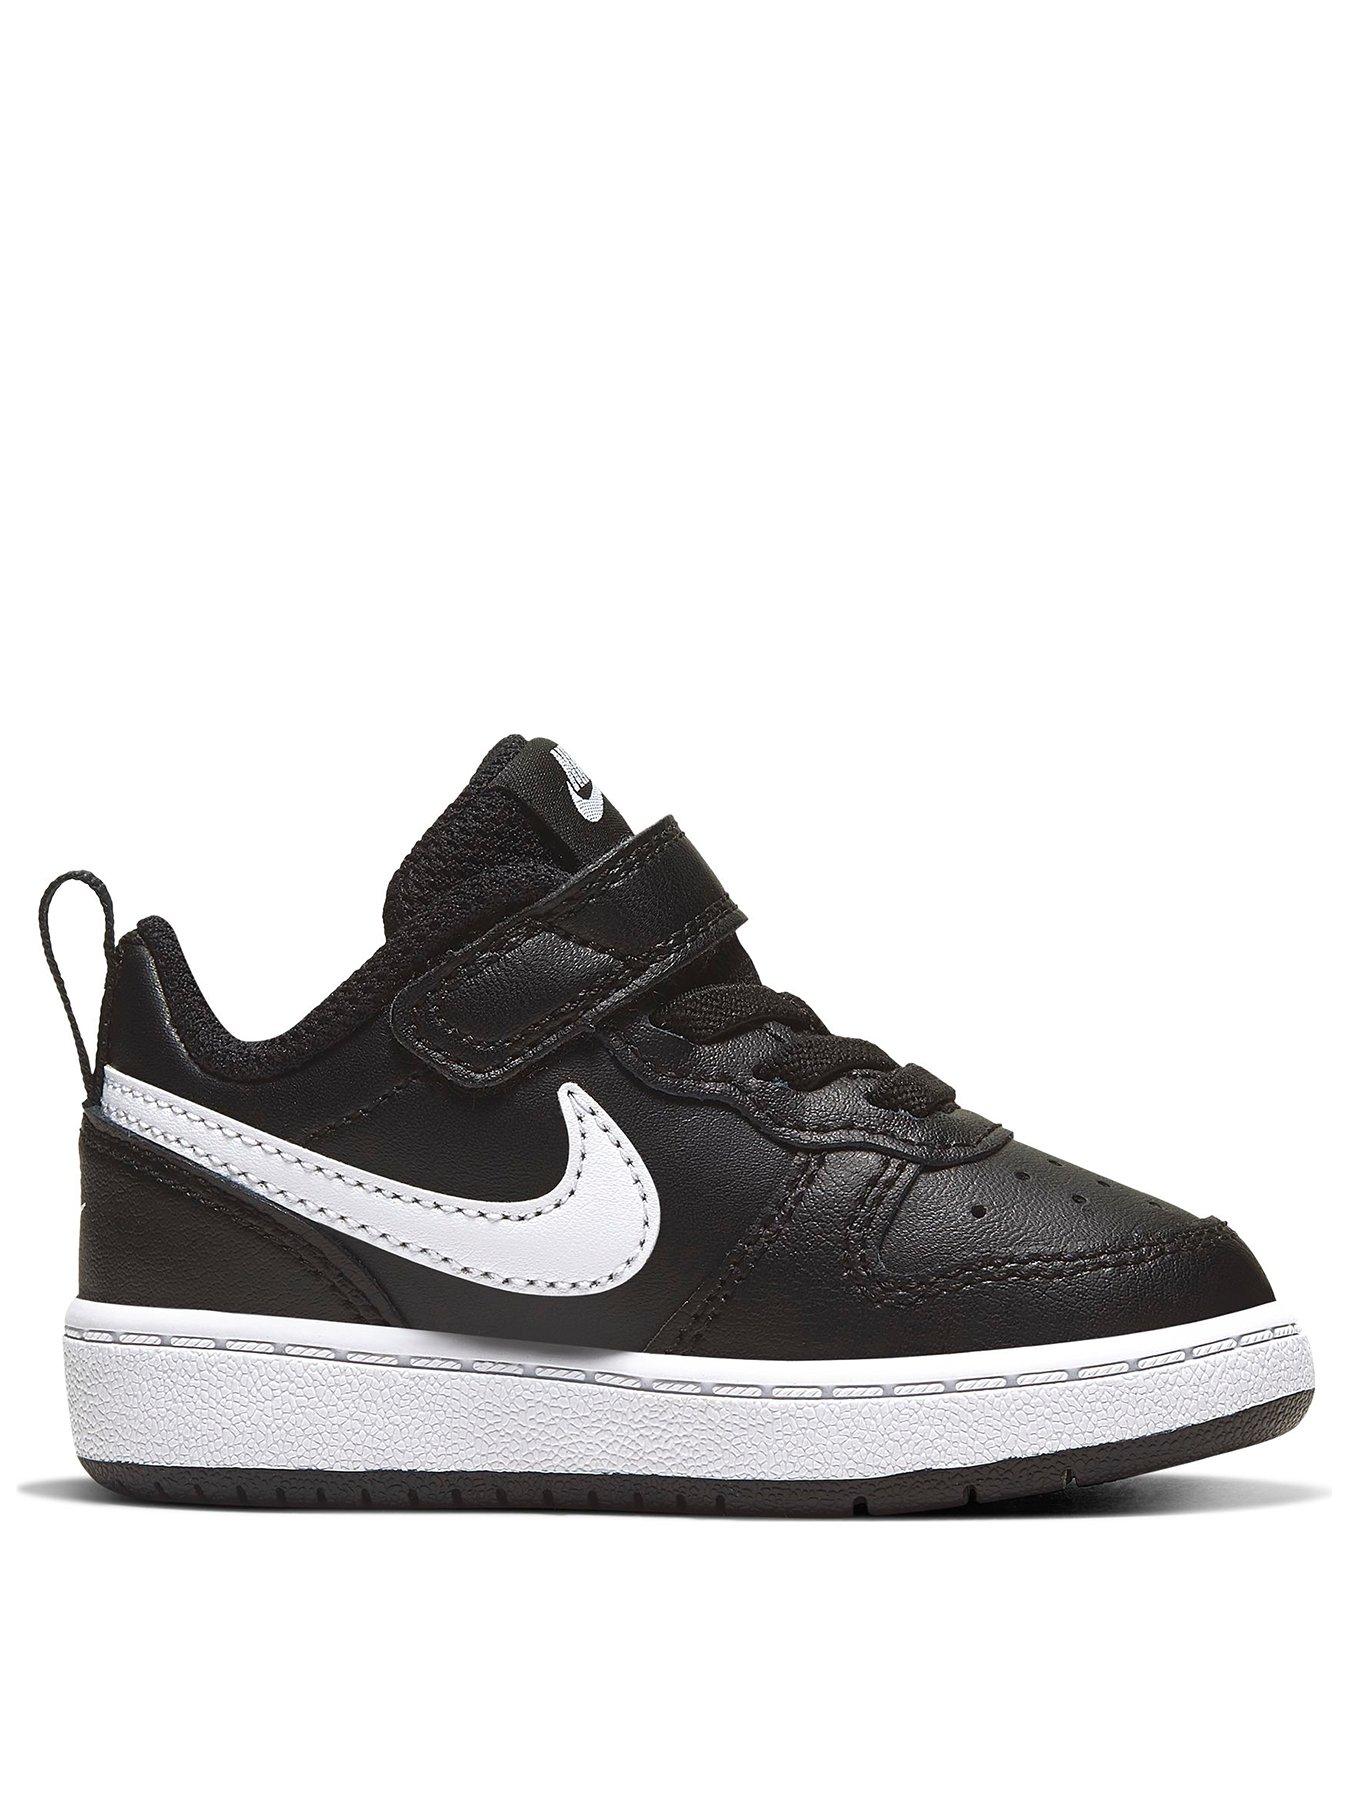 Trainers Court Borough Low 2 Infant Trainers - Black/White